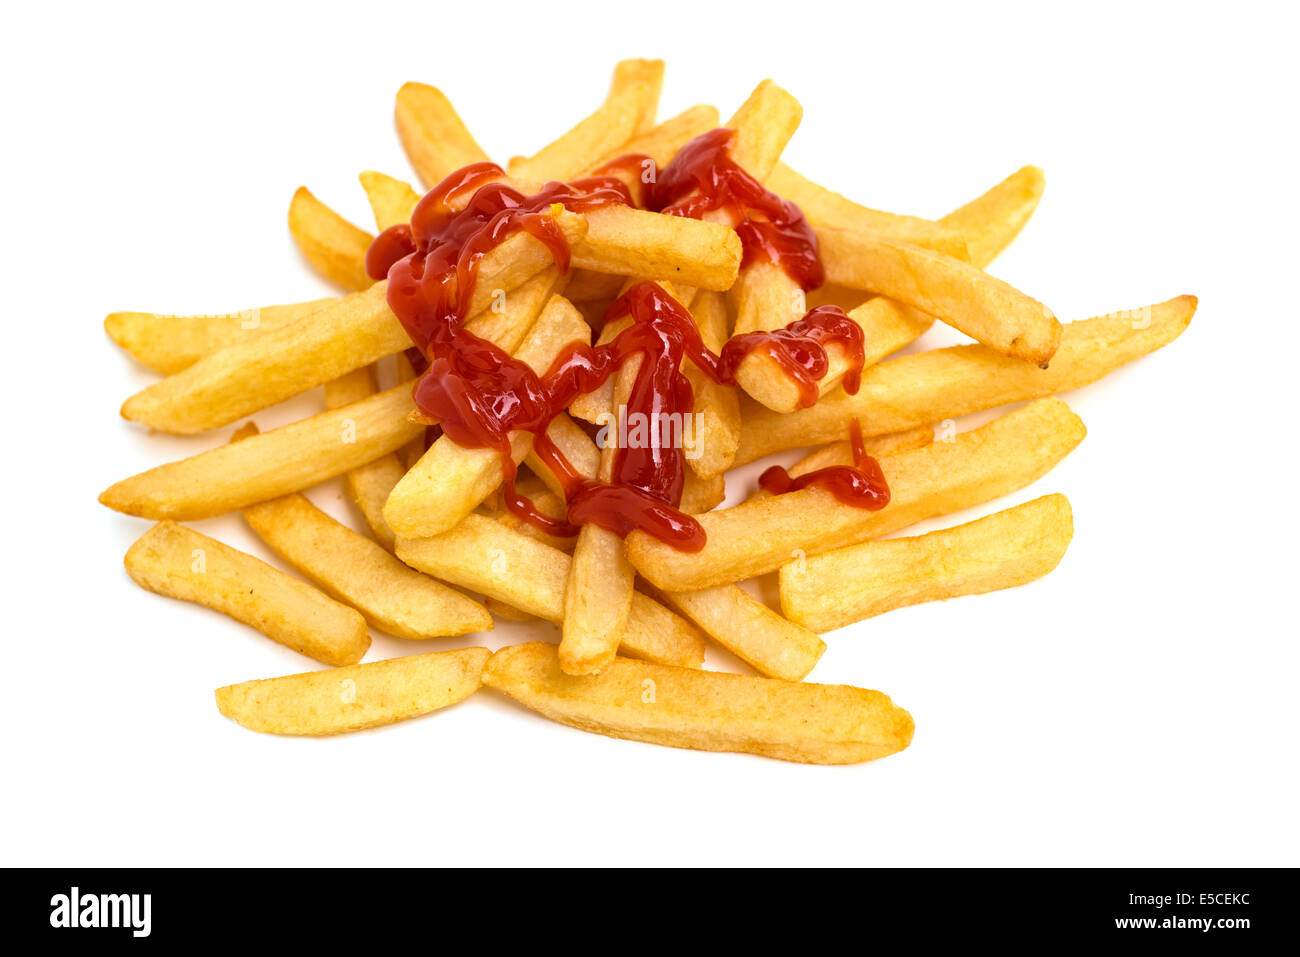 Fries, patate fritte con Ketchup Salsa Catsup Foto Stock